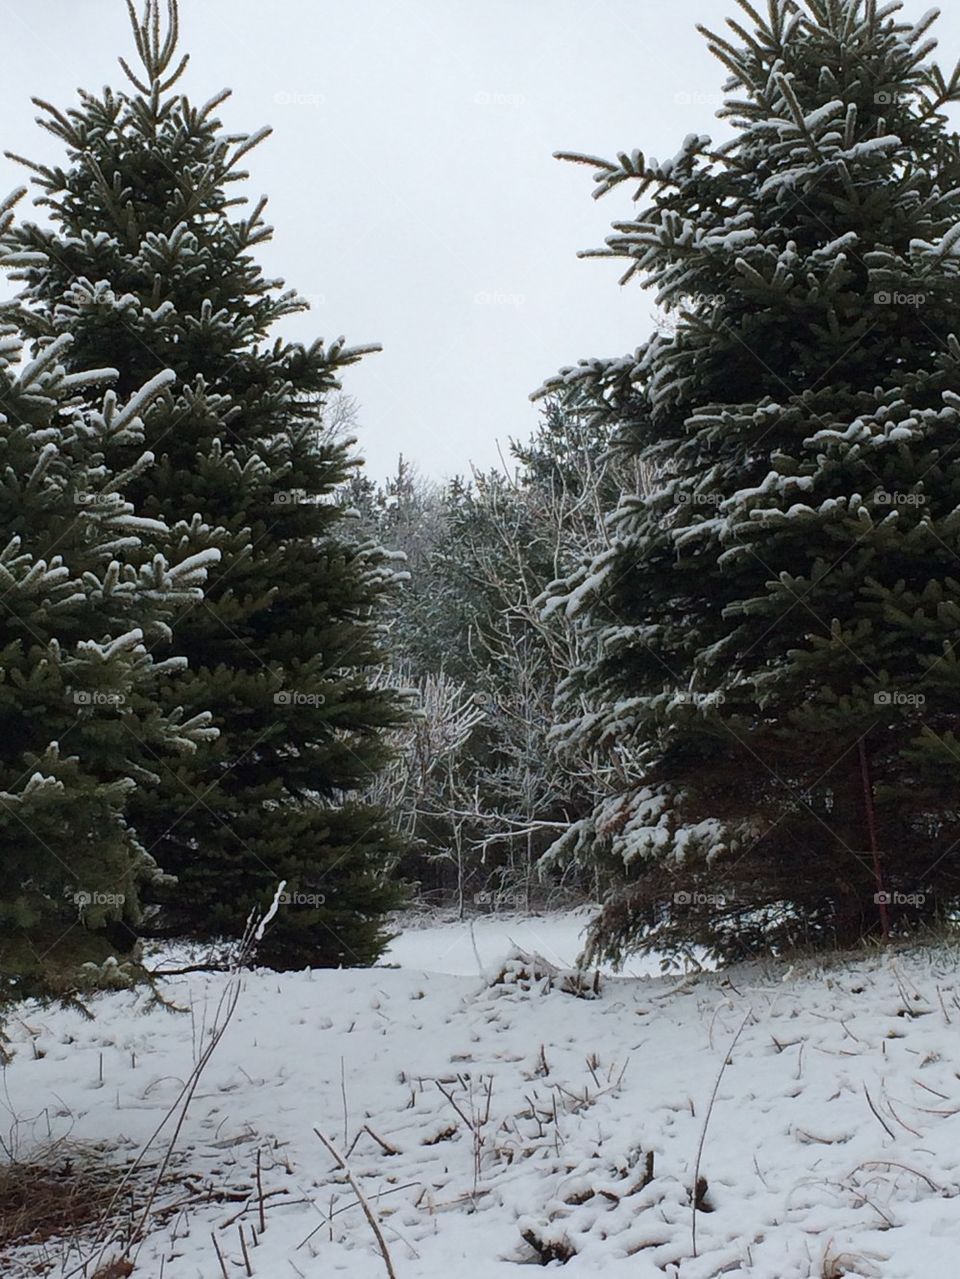 Snow and white pines